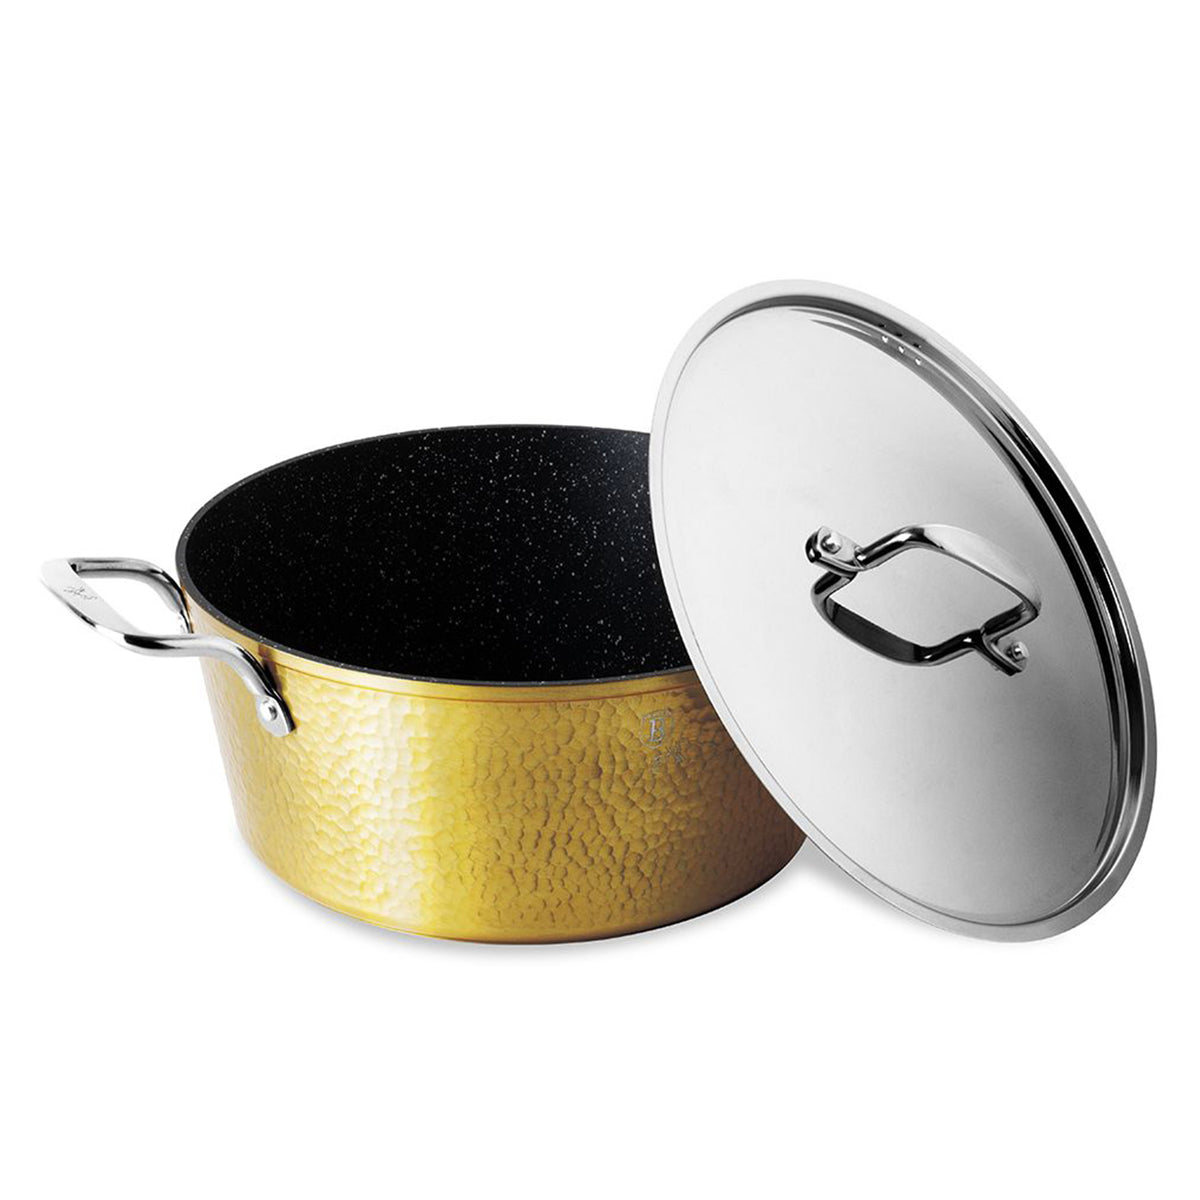 Hammered casserole with stainless steel lid and handles size 32 cm gold